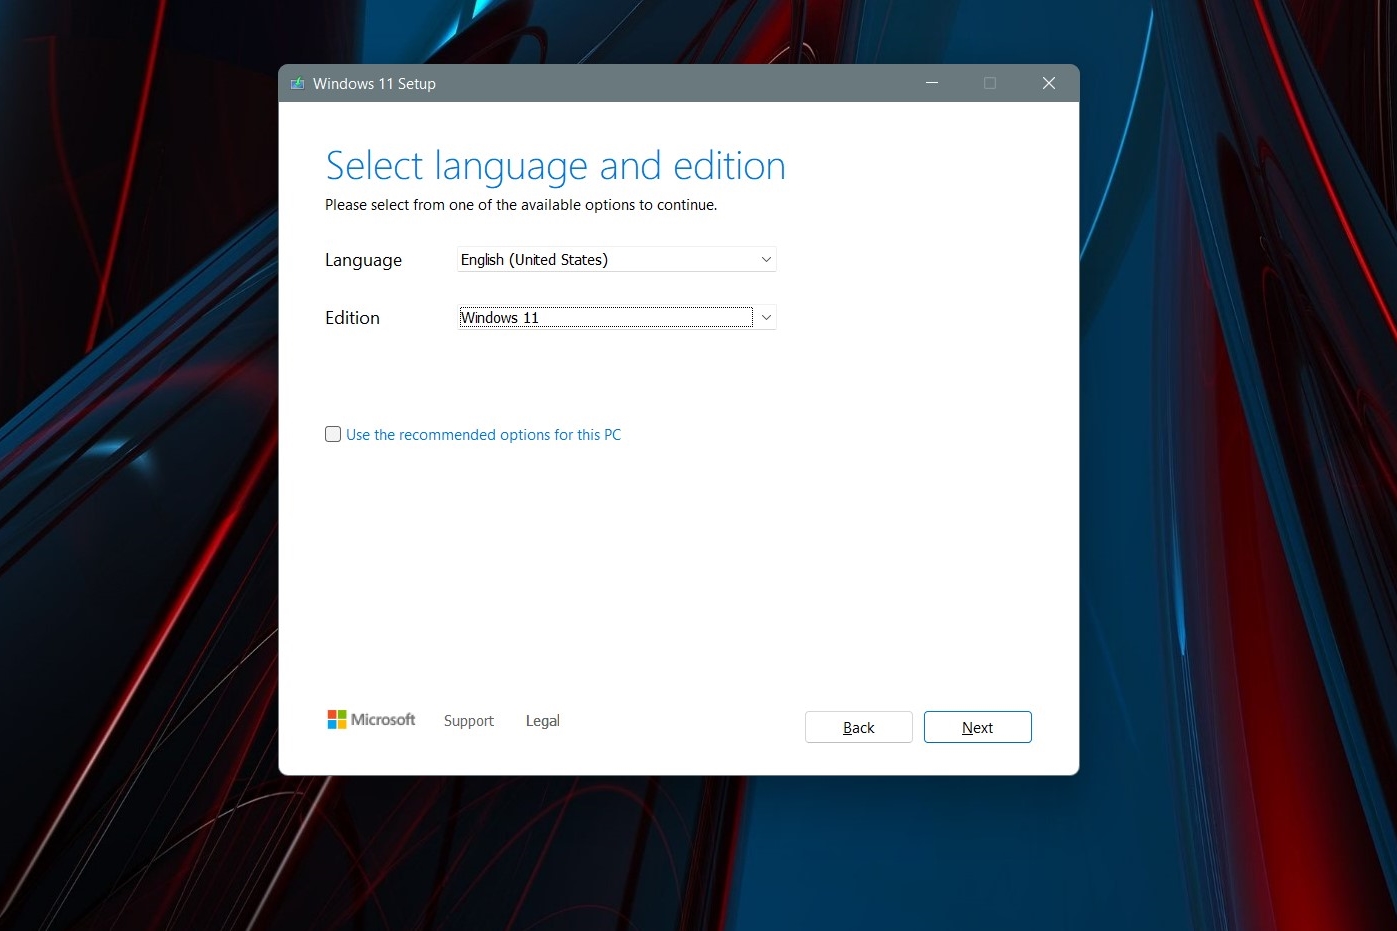 How to Install Windows 11